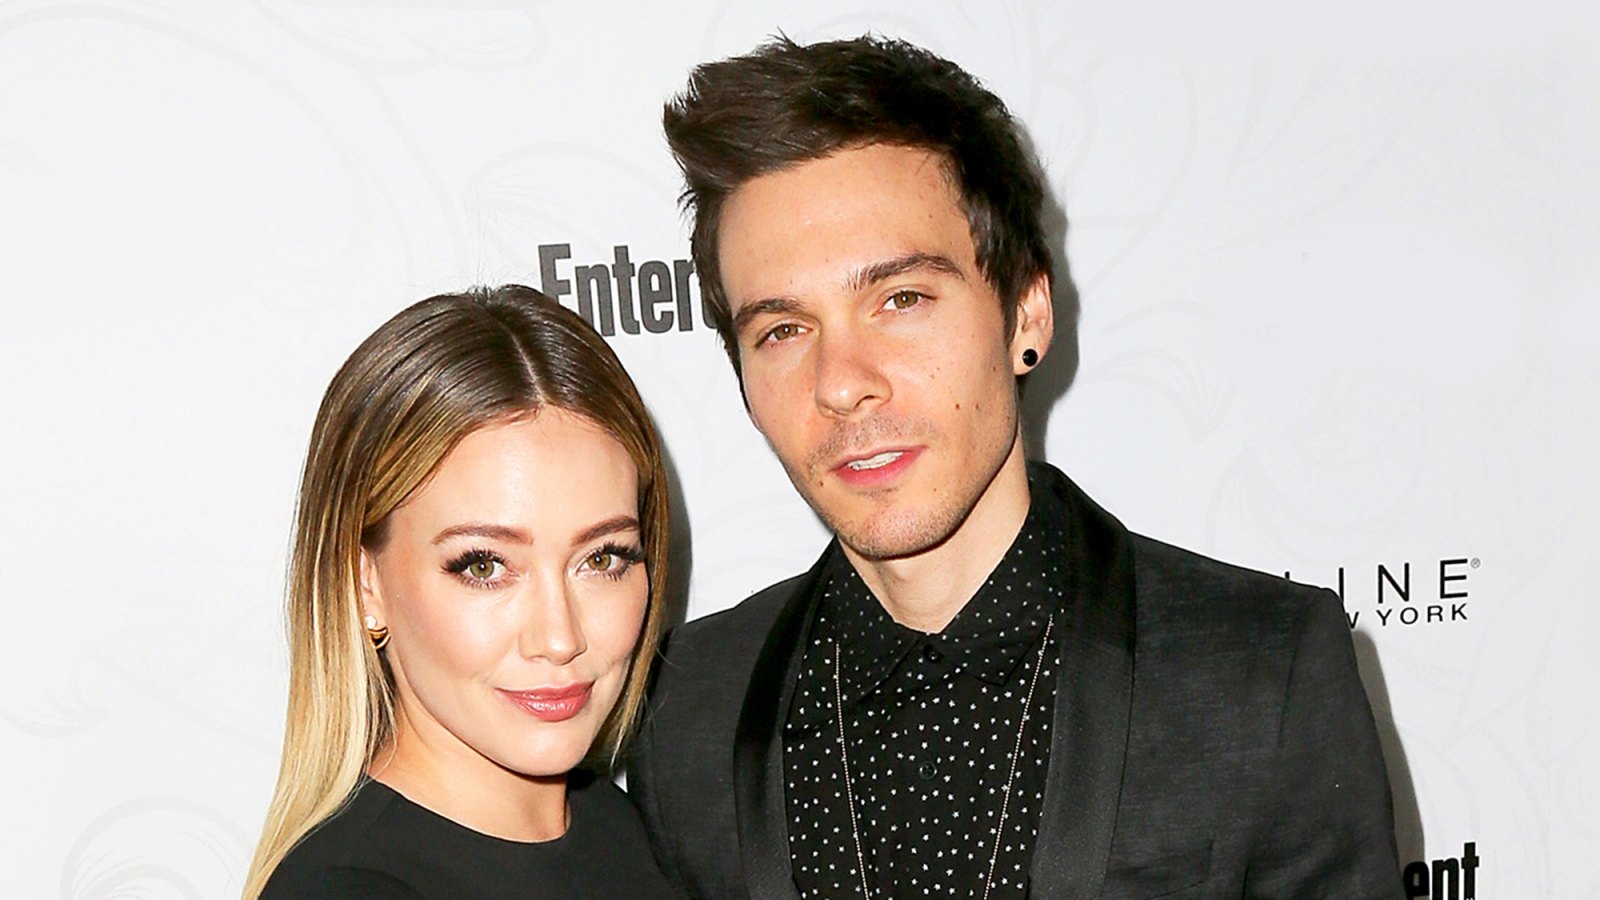 Hilary Duff and Matthew Koma arrive at the Entertainment Weekly celebration honoring nominees for The Screen Actors Guild Awards at the Chateau Marmont on January 28, 2017 in Los Angeles, California.